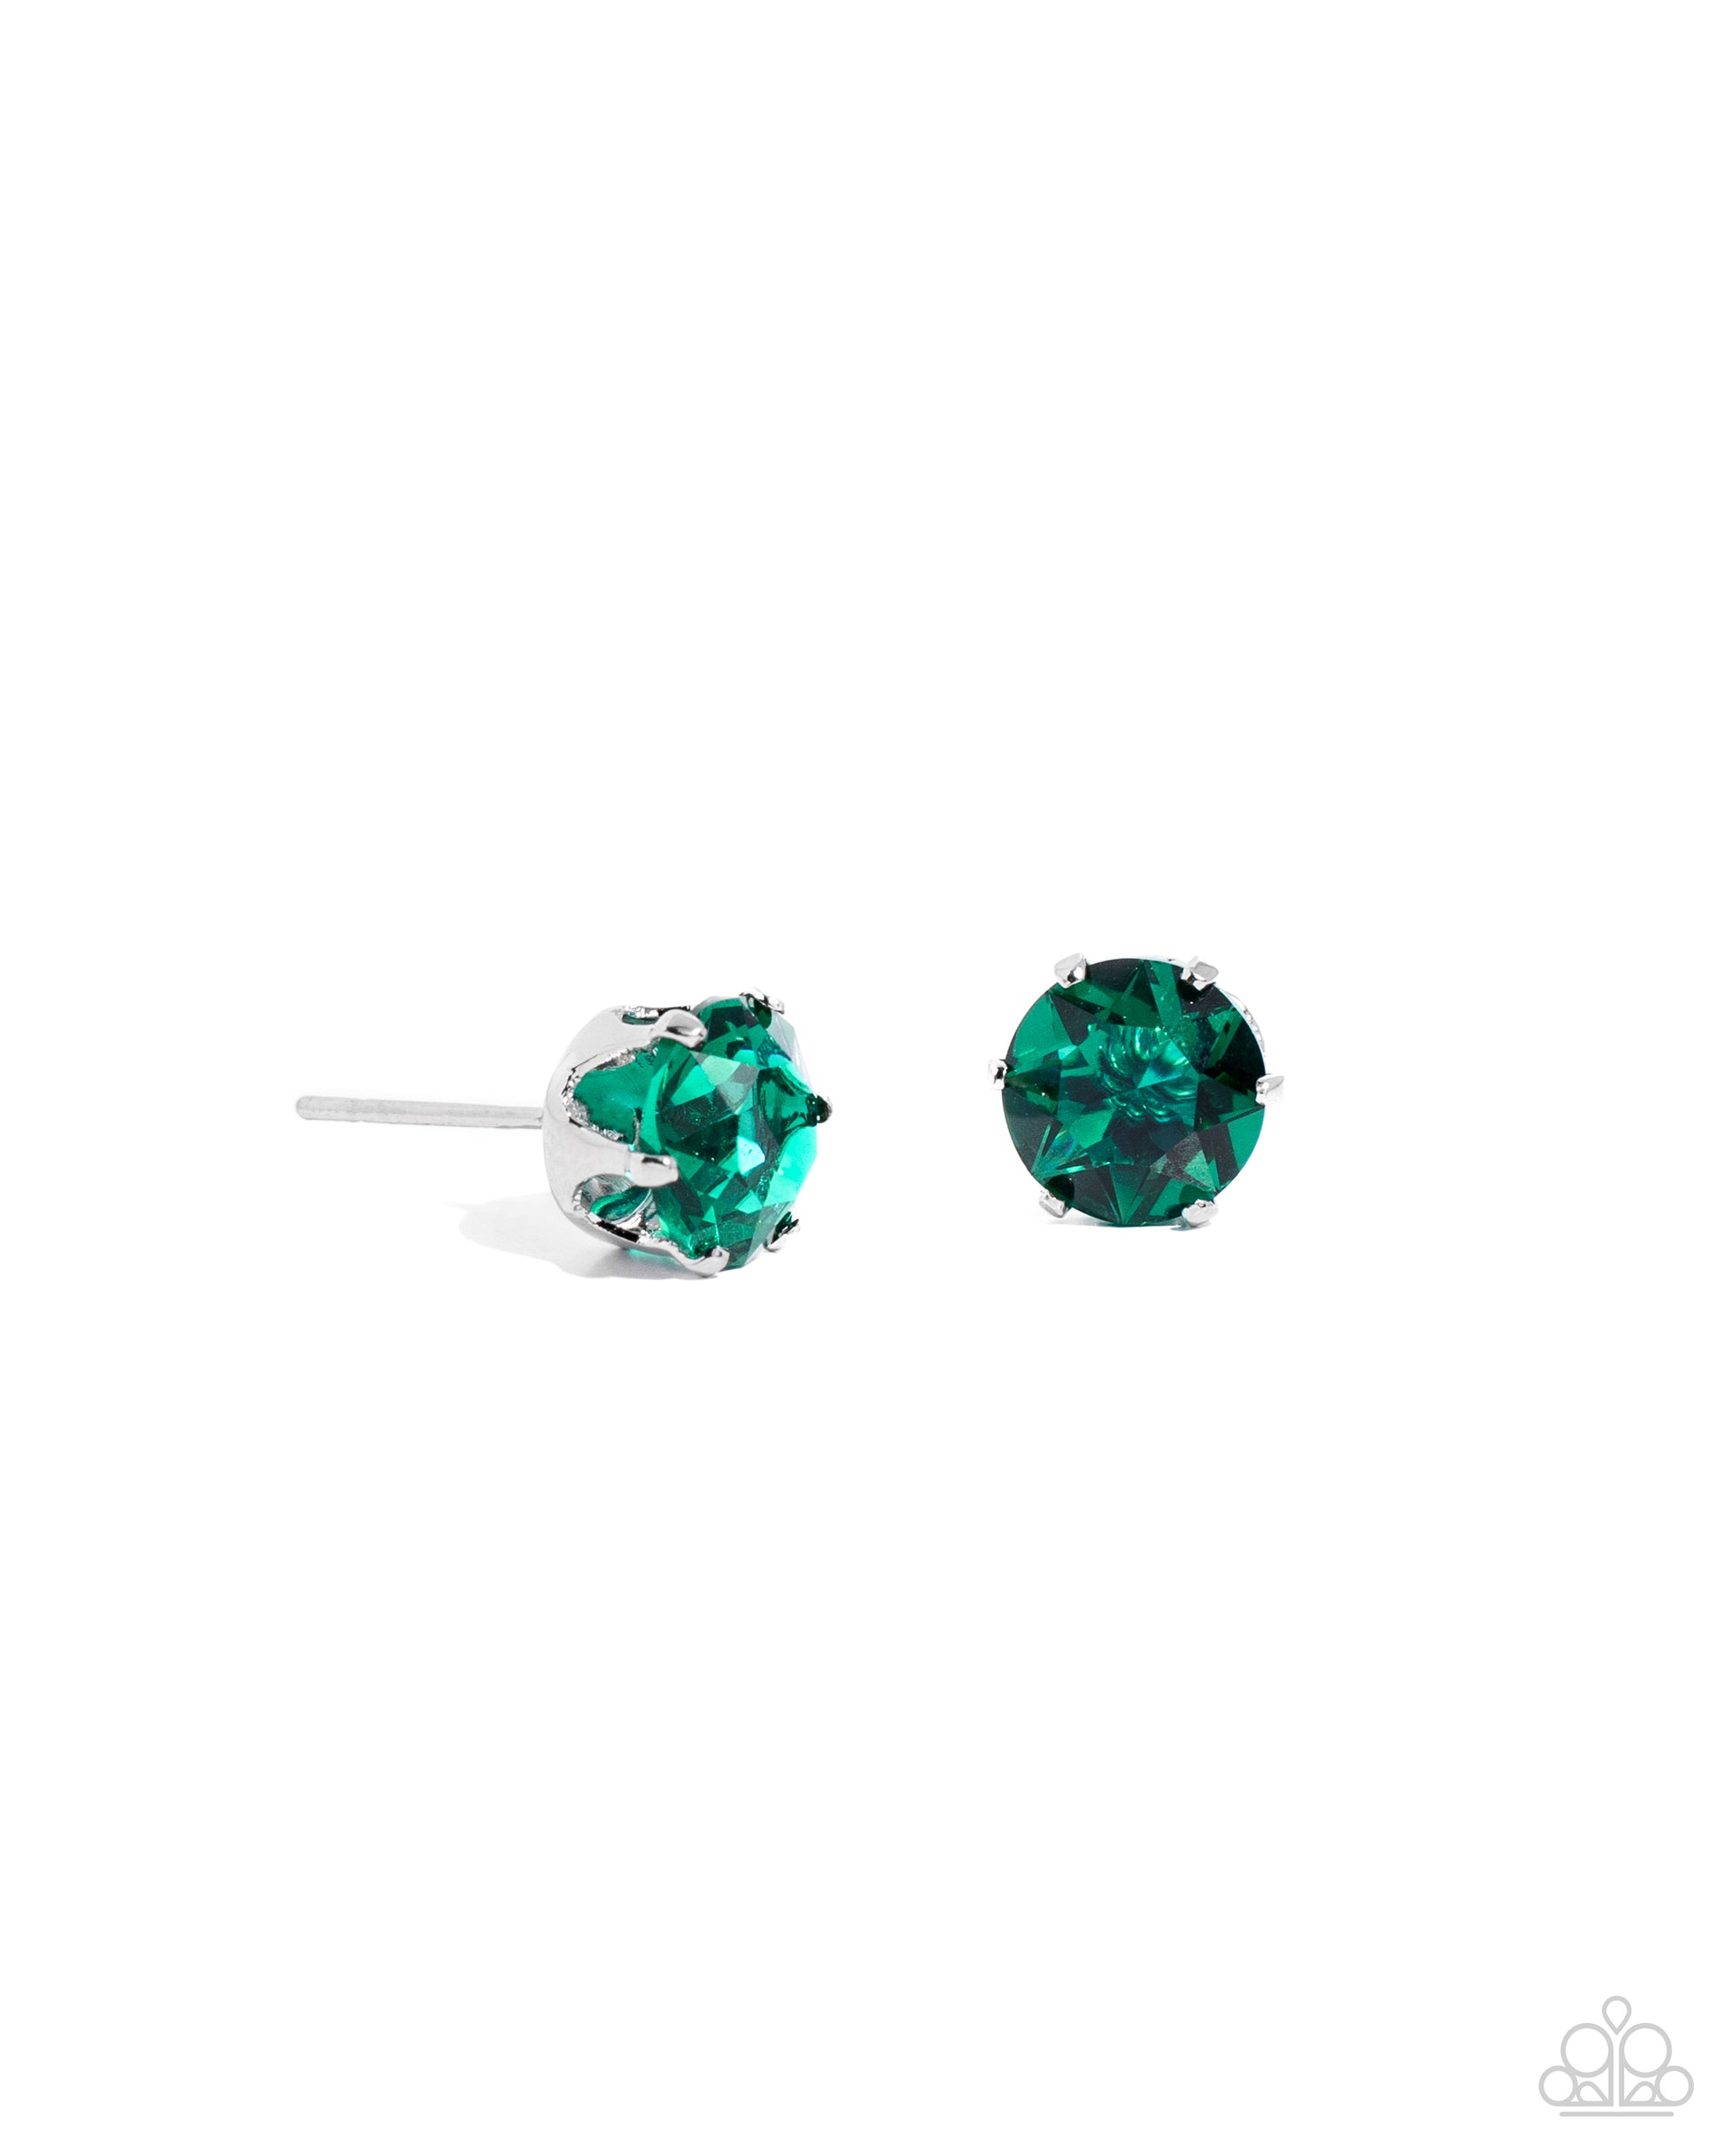 <p>A sparkling emerald rhinestone is nestled inside a classic silver frame for a beautiful birthstone-inspired display. Earring attaches to a standard post fitting.</p> <p><i> Sold as one pair of post earrings.</i></p>